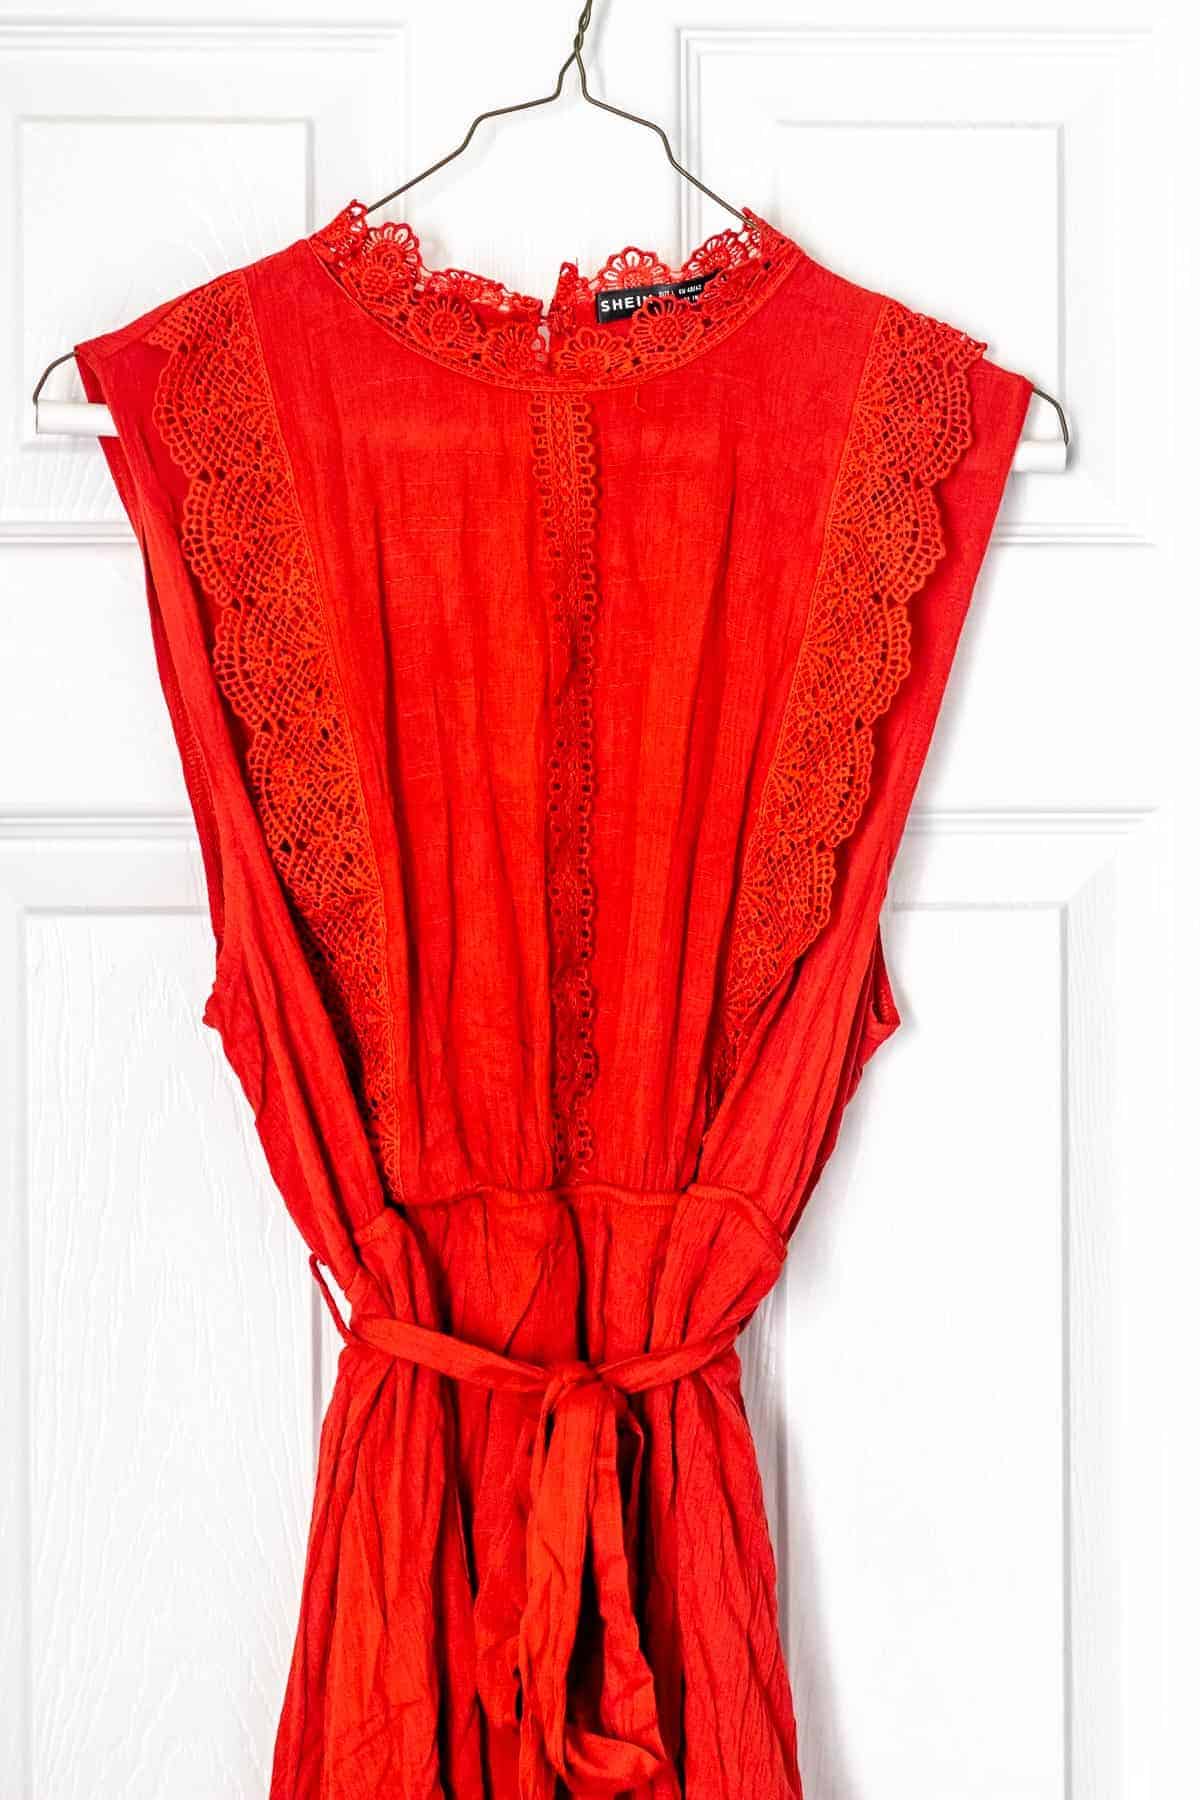 Close up of the top of a red dress on a hanger